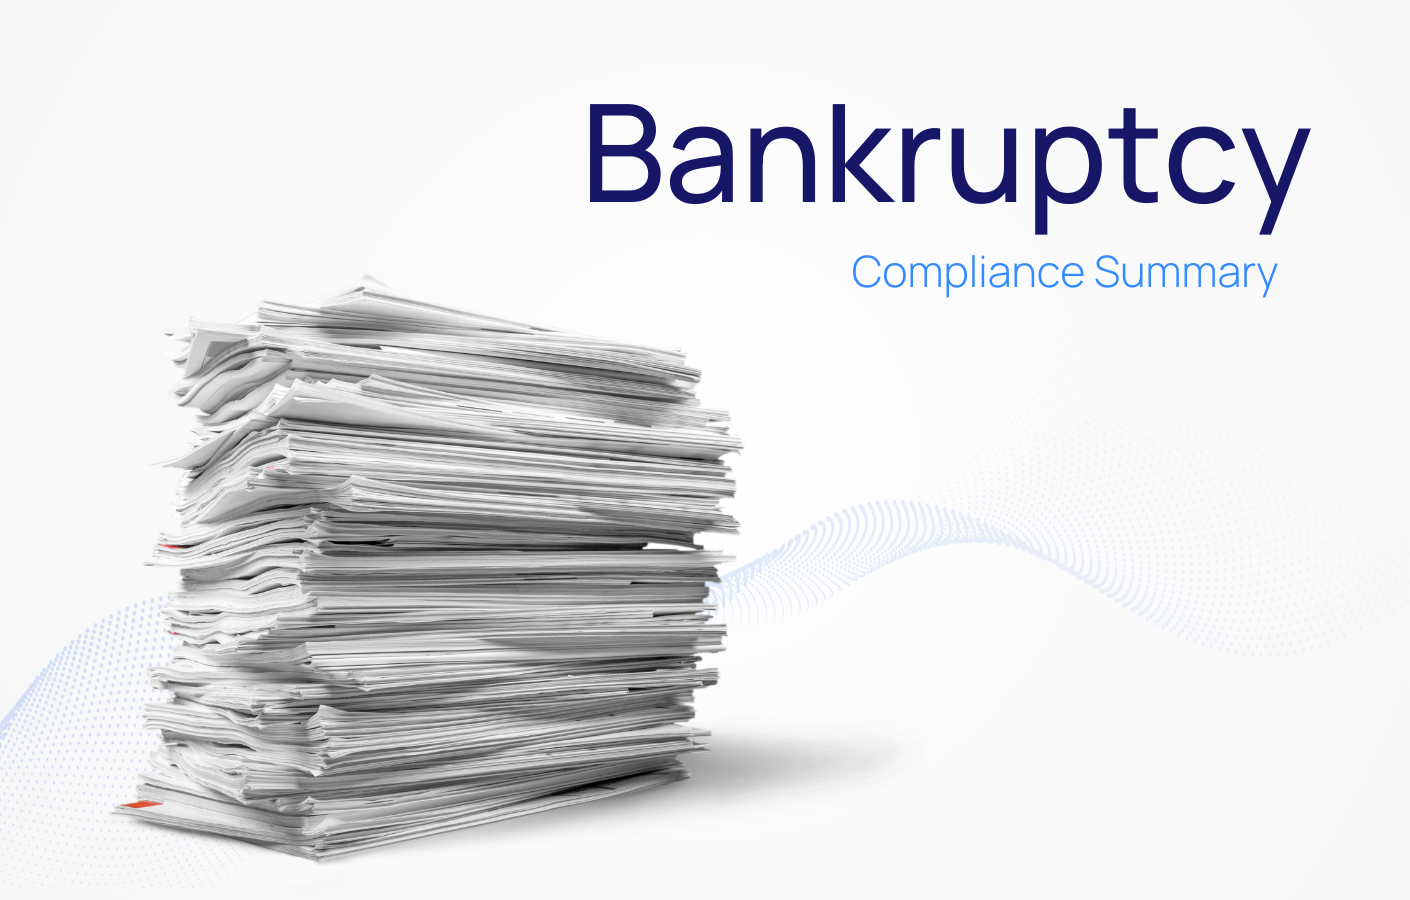 Bankruptcy Compliance Summary